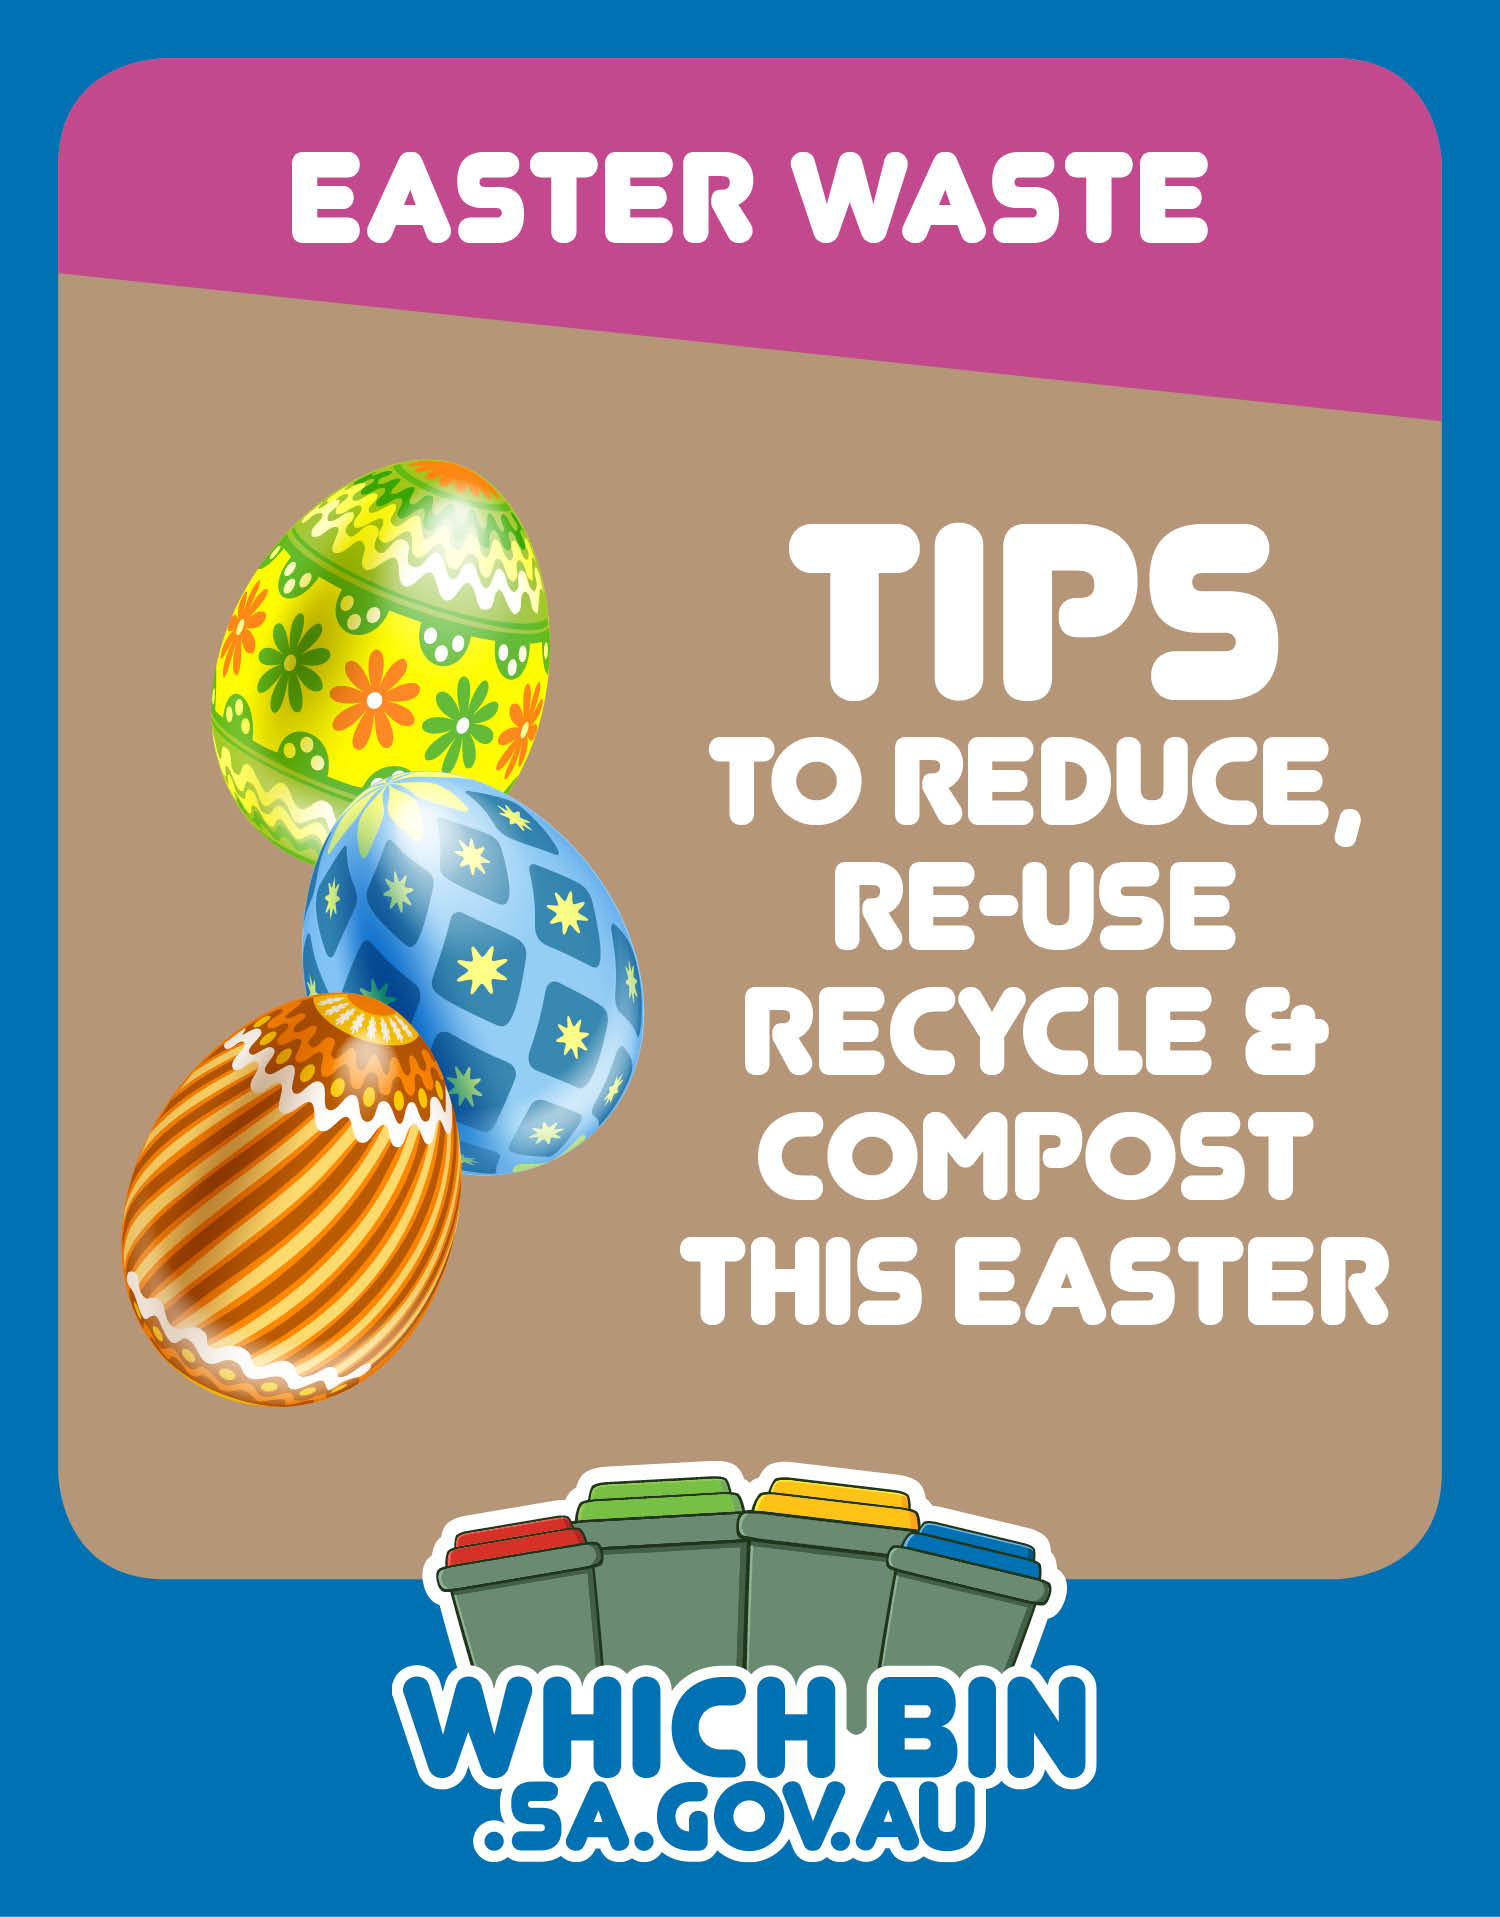 Remember to recycle your foil Easter Eggs wrappers.